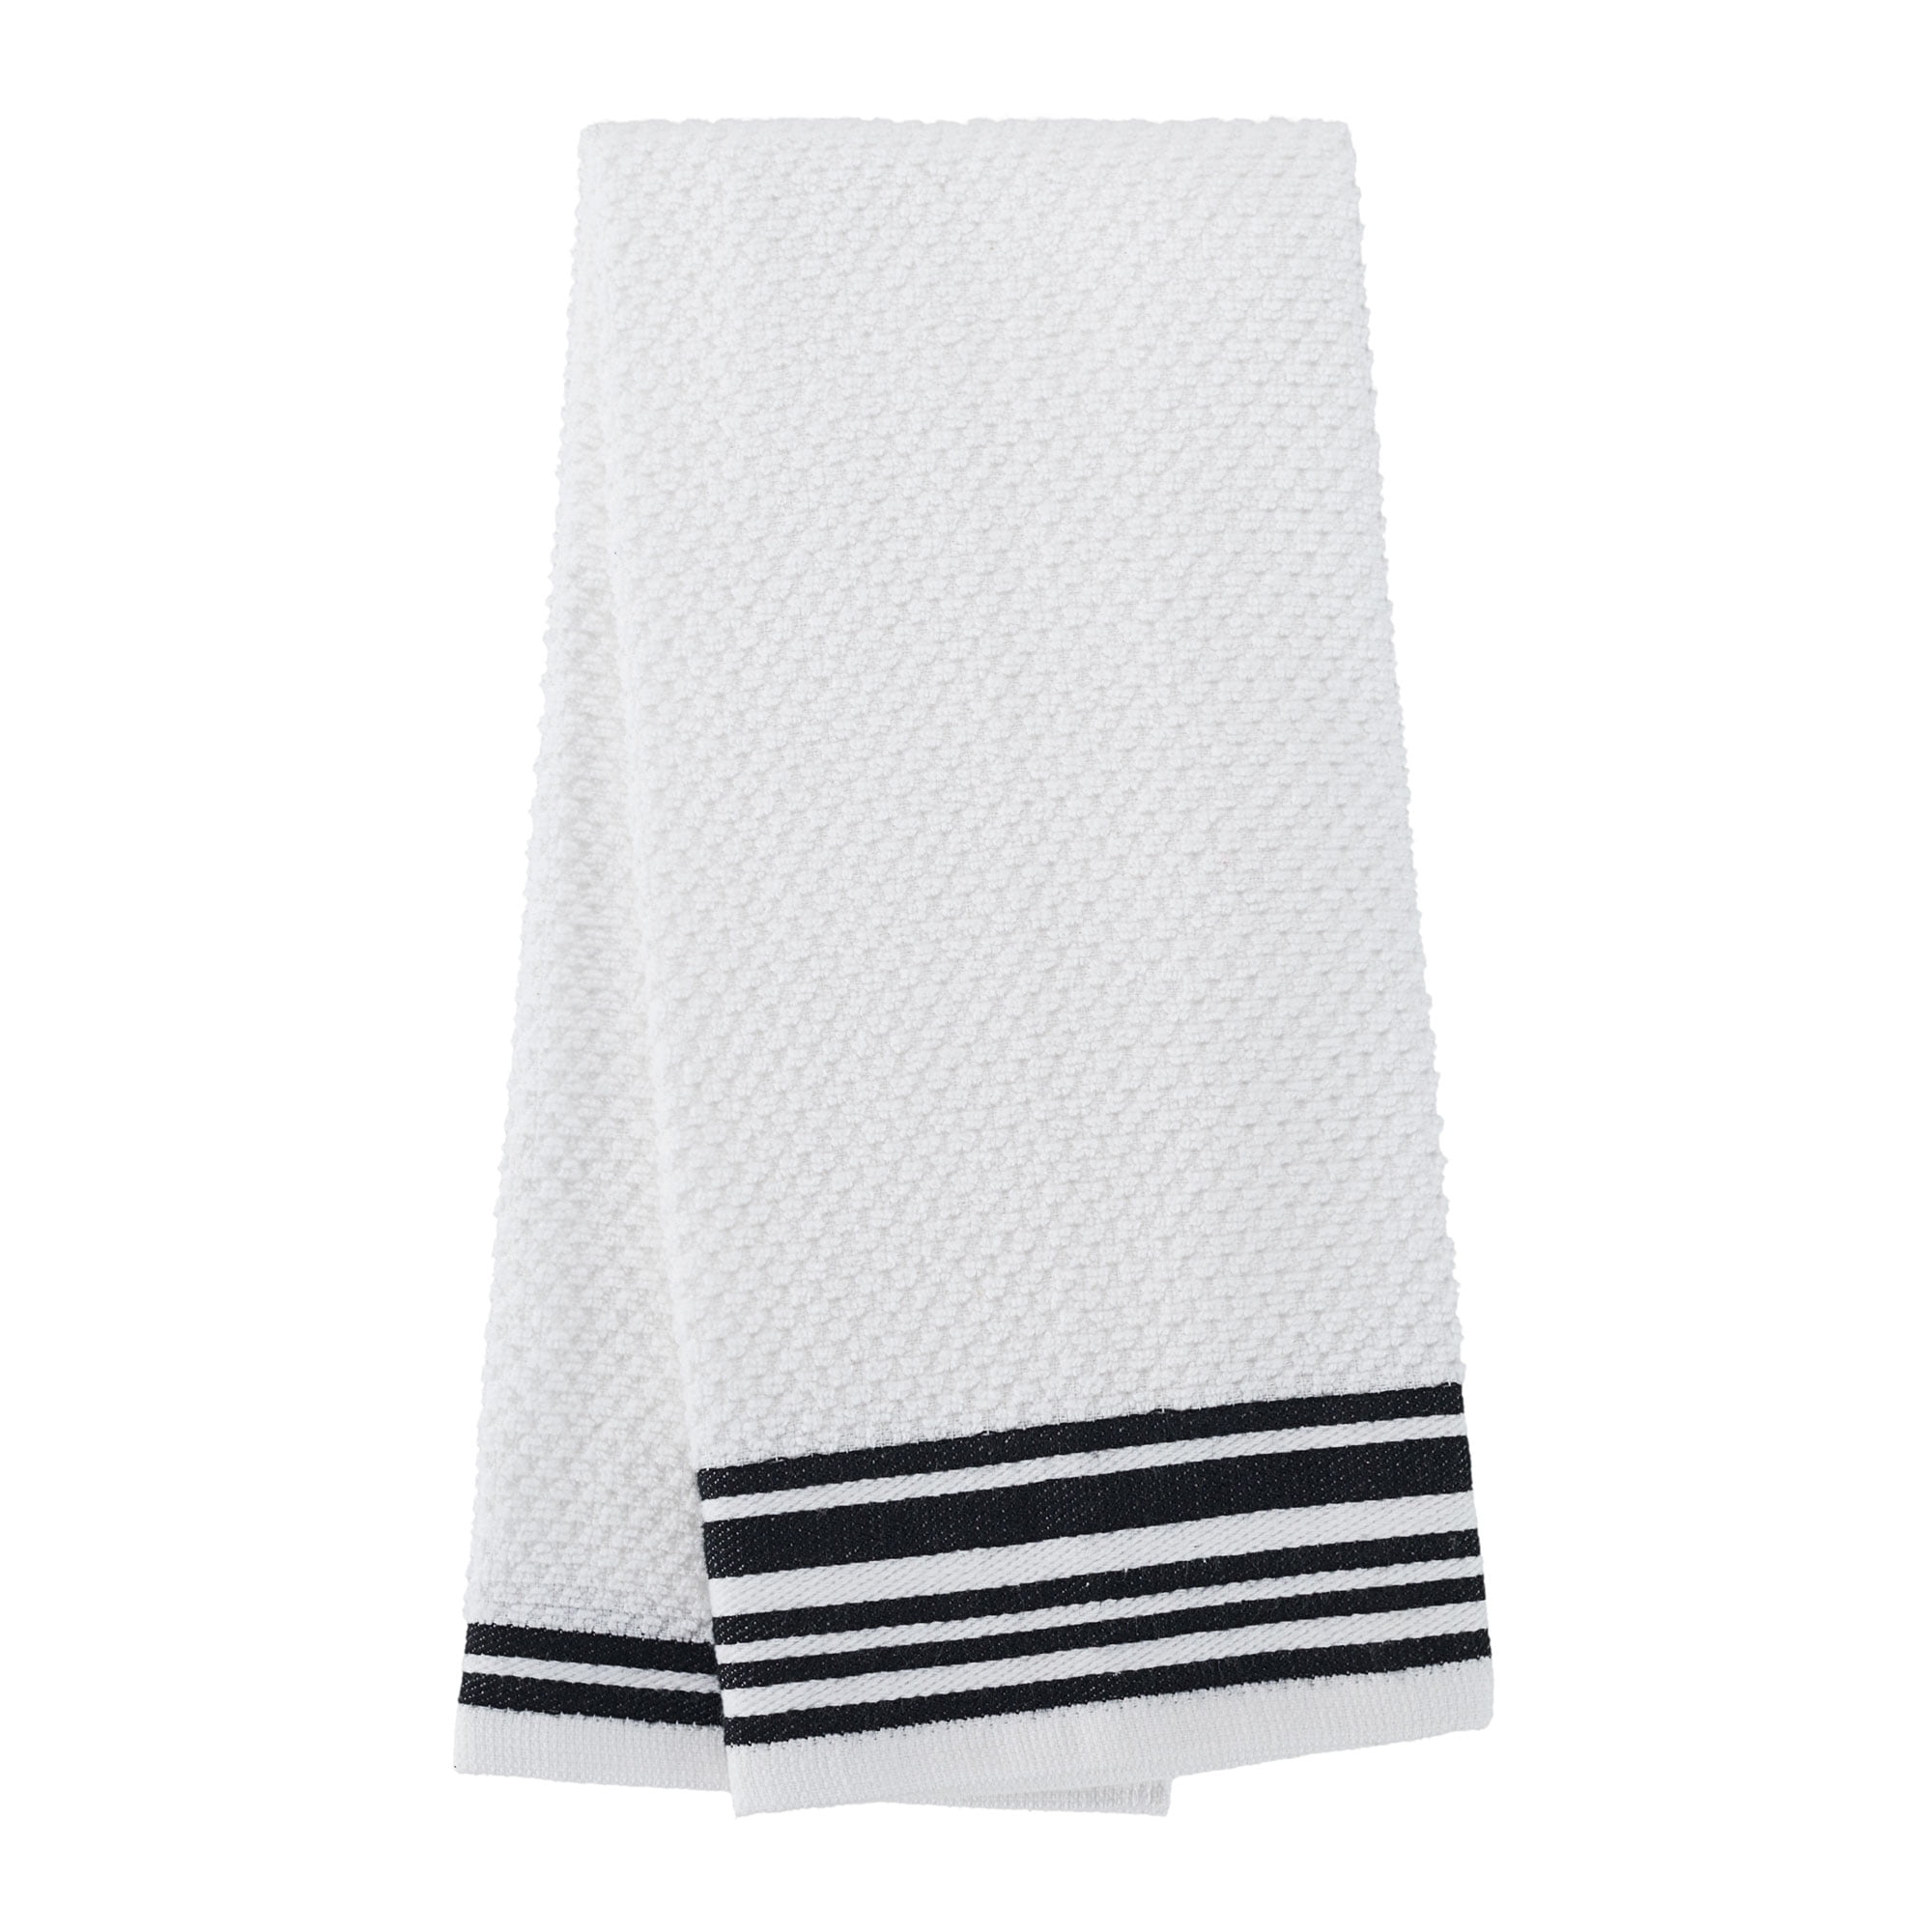 Modern Morocco Black White Kitchen Towel Set Cleaning Cloth